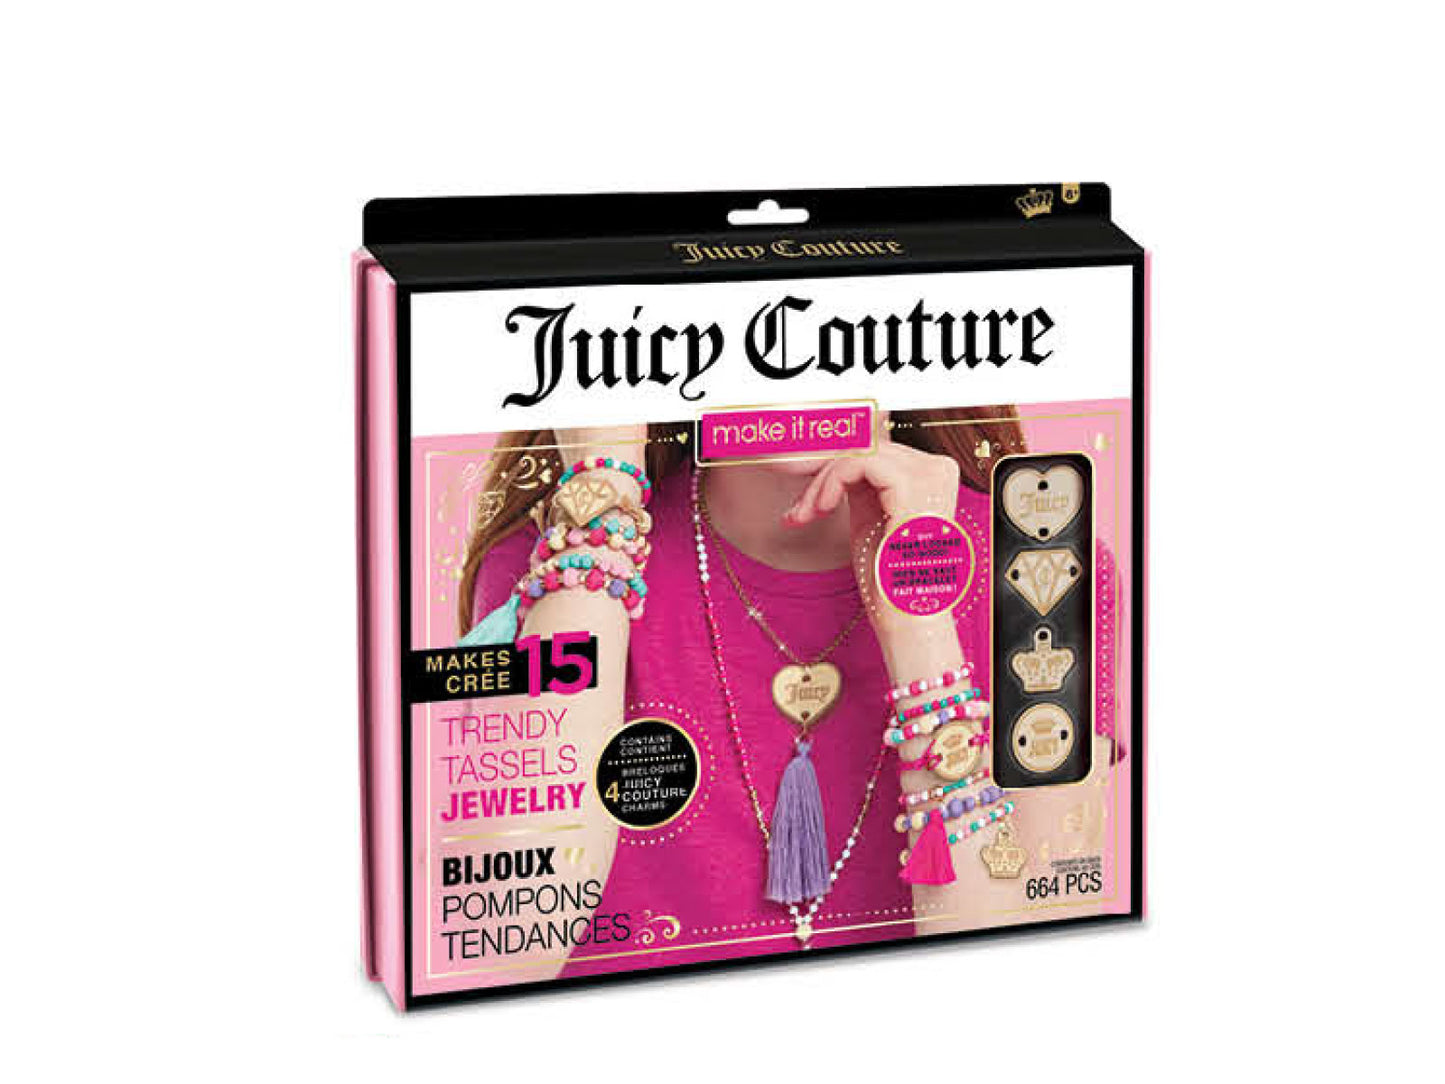 Juicy Couture Create 4 Charms. DIY Jewelry Making Kit for Girls. Trendy Tassels Jewelry - Makes 15 Cree, 664 Pcs